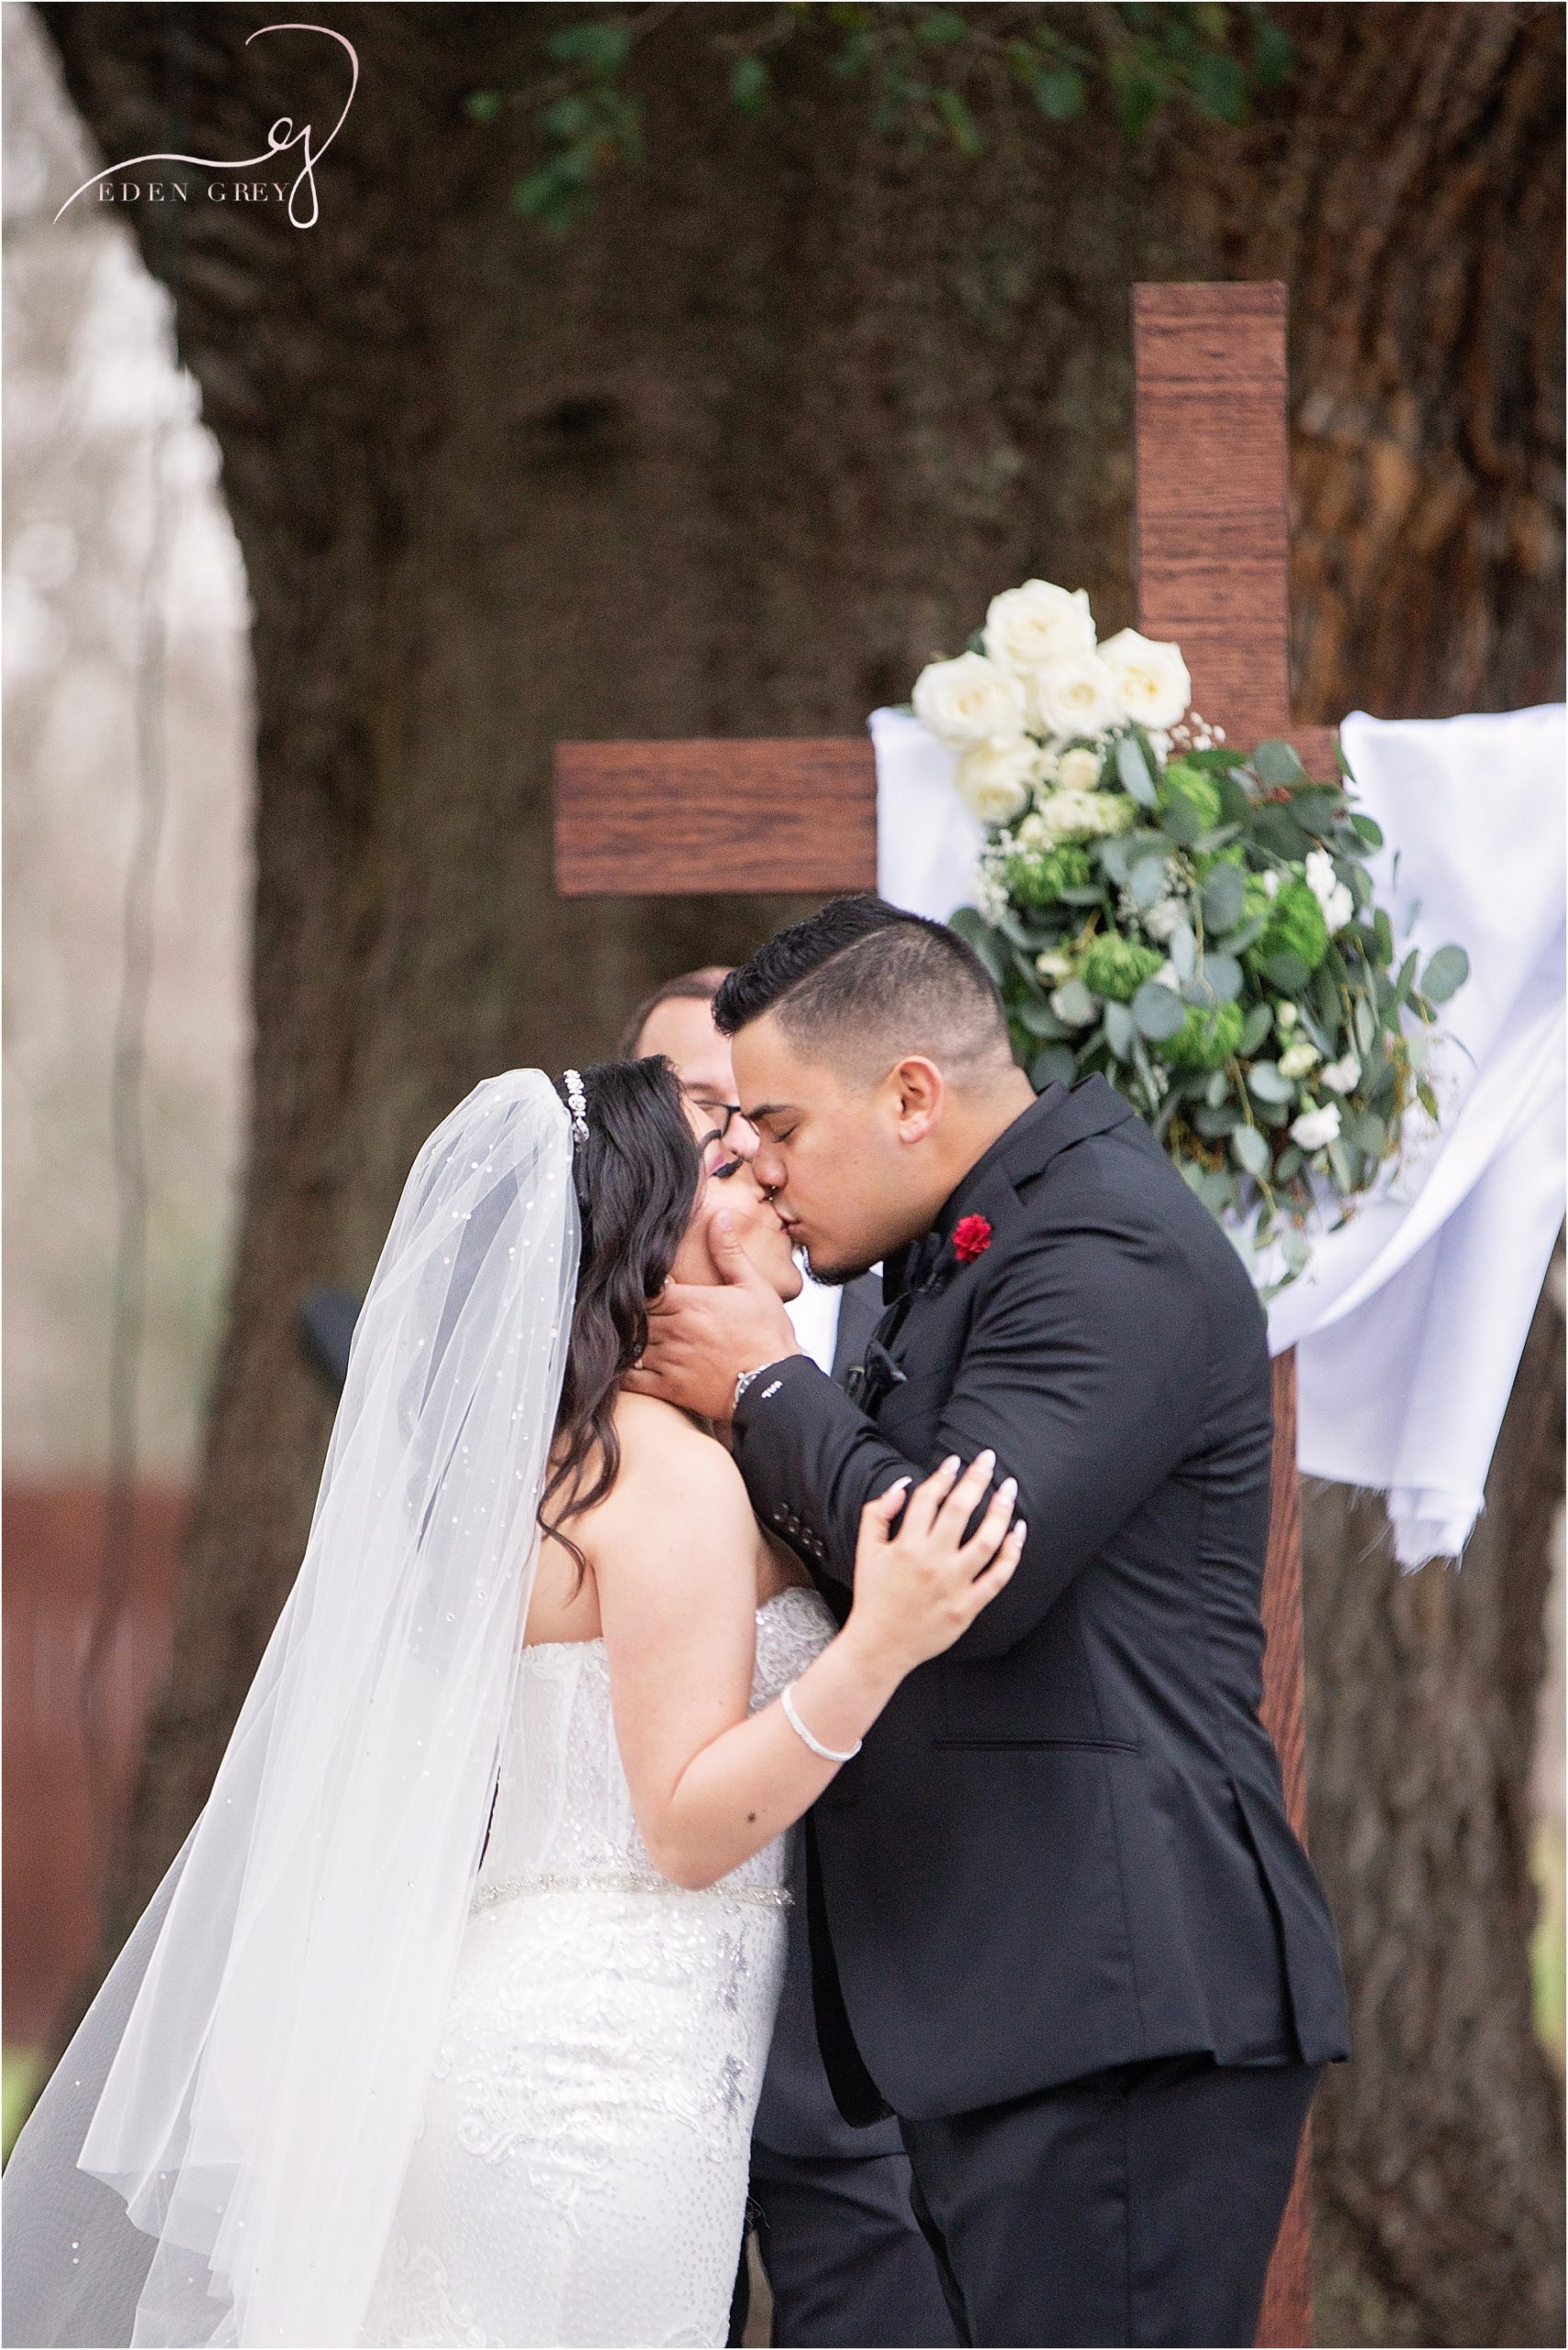 Who are the top wedding photographers in Houston